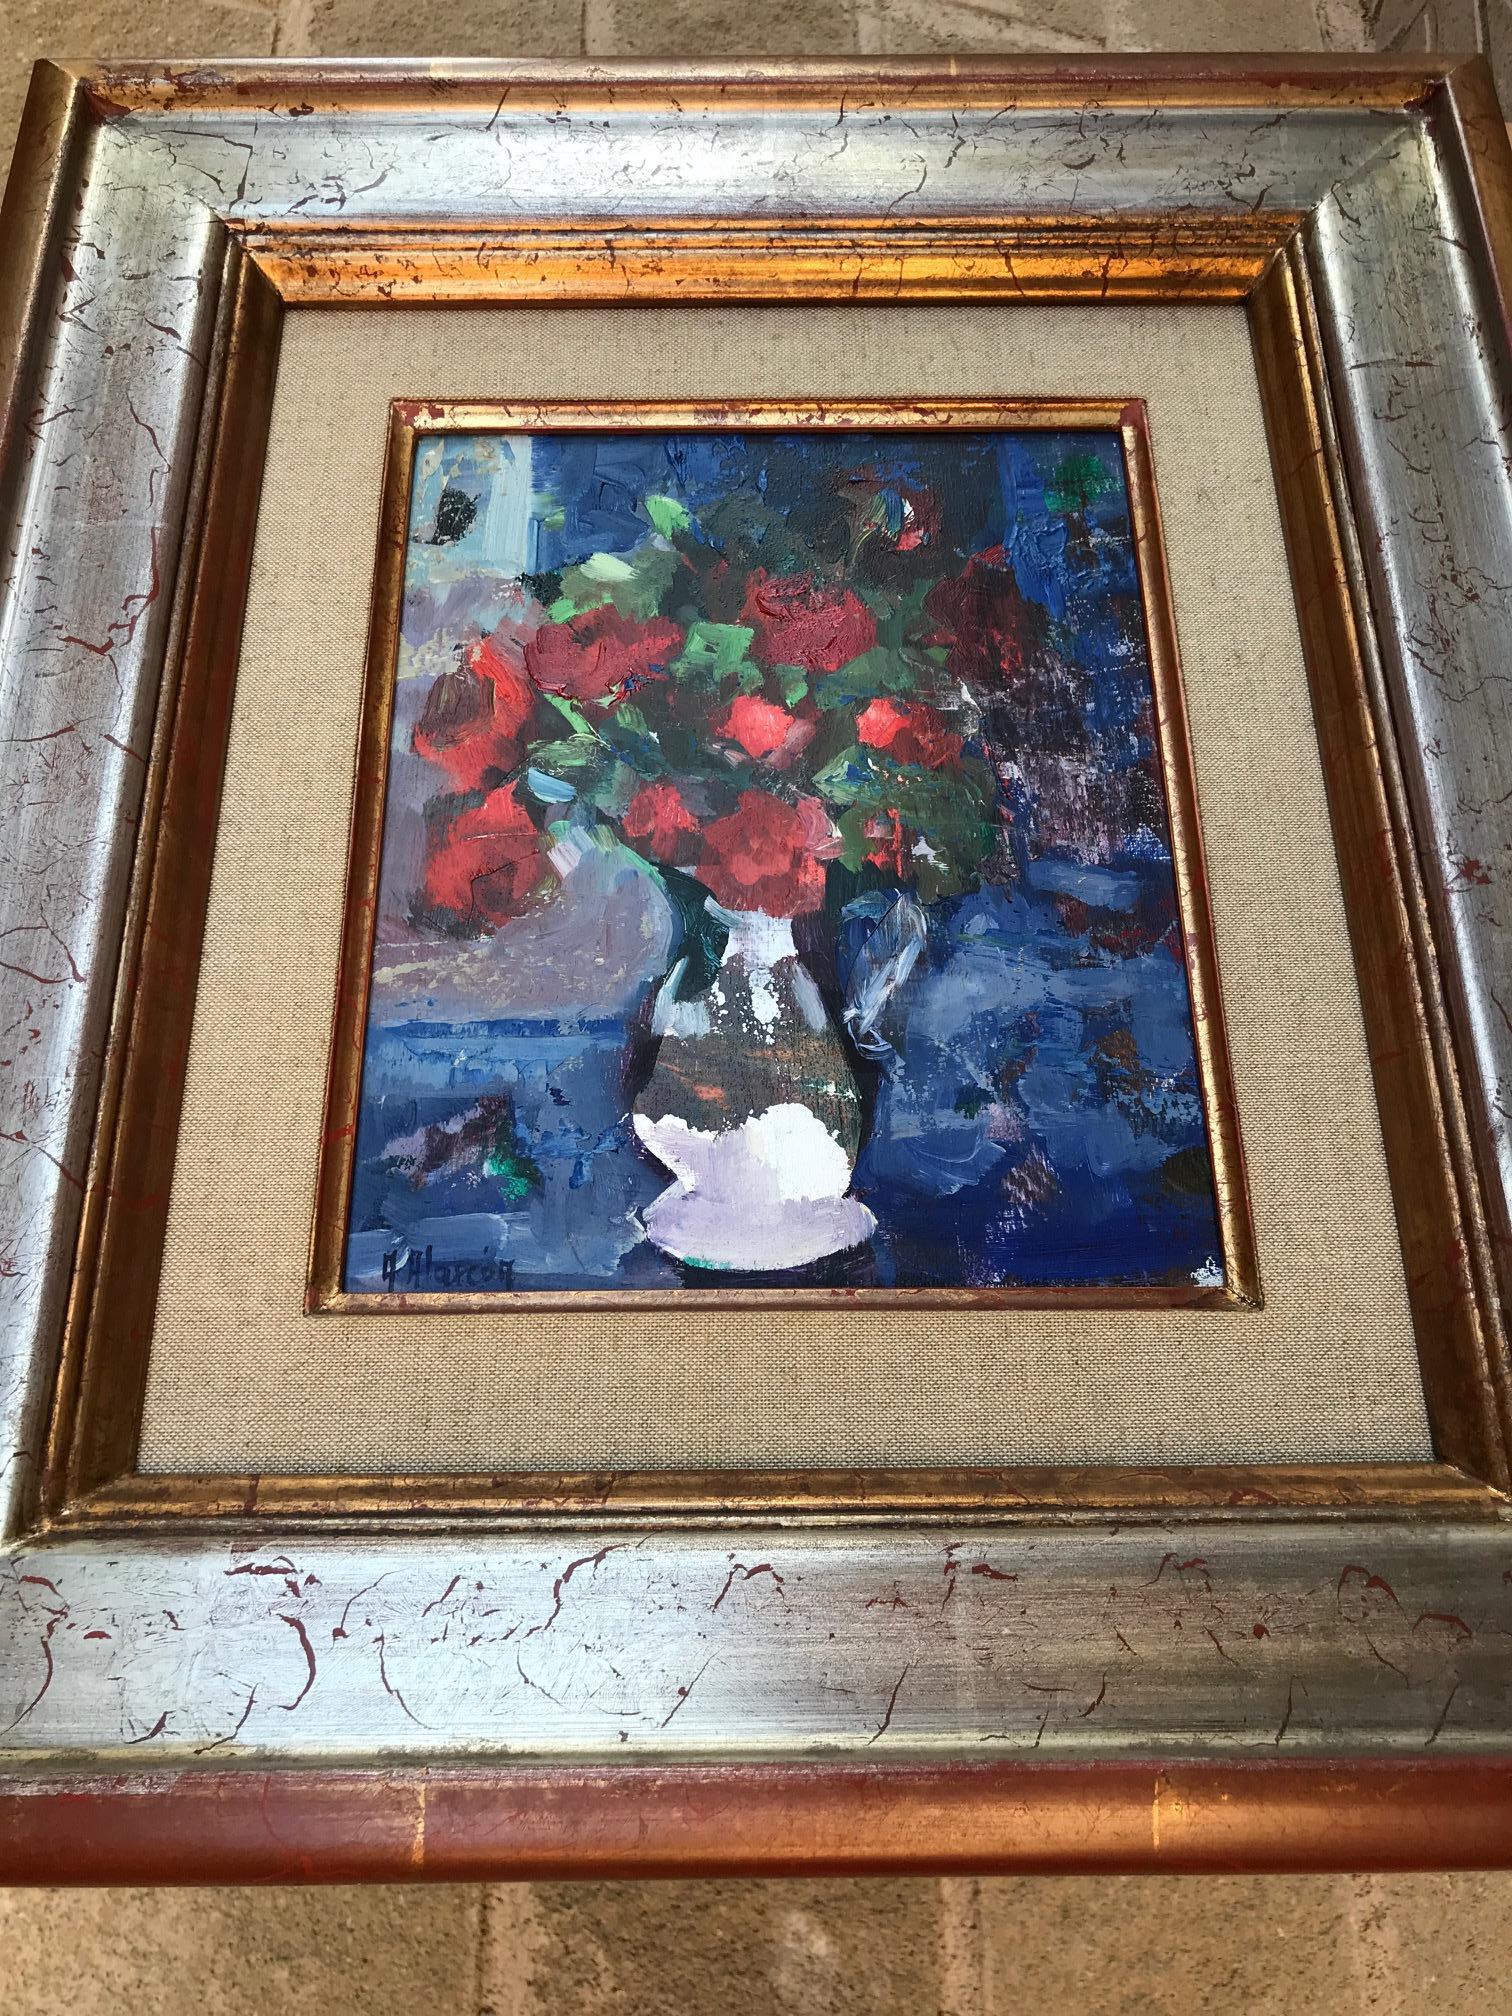 Roses and Blues. Oil on panel Still Life with red roses on blue background - Expressionist Painting by Aracely Alarcón